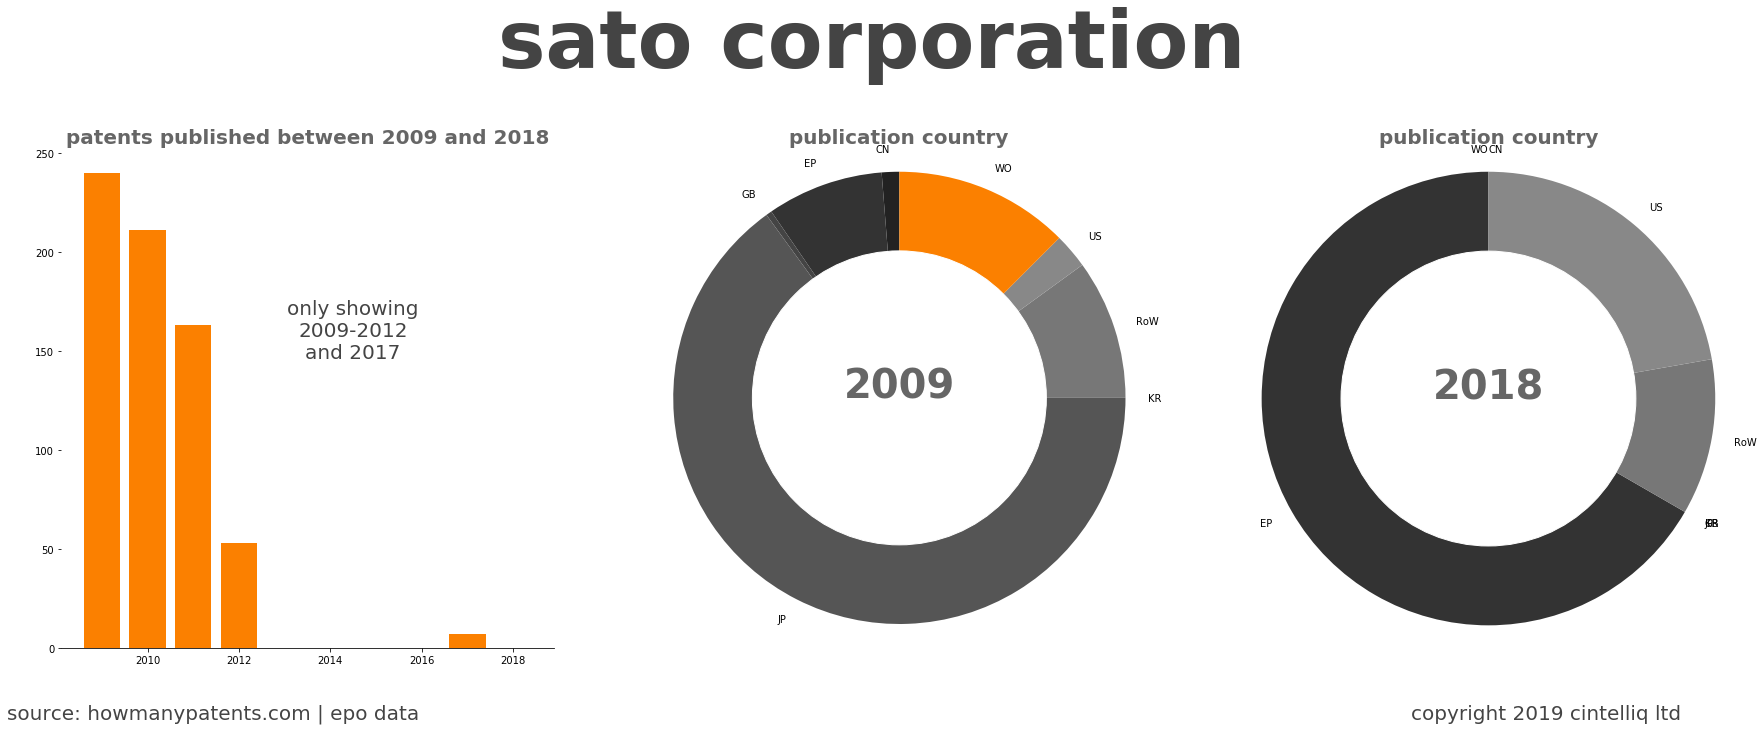 summary of patents for Sato Corporation